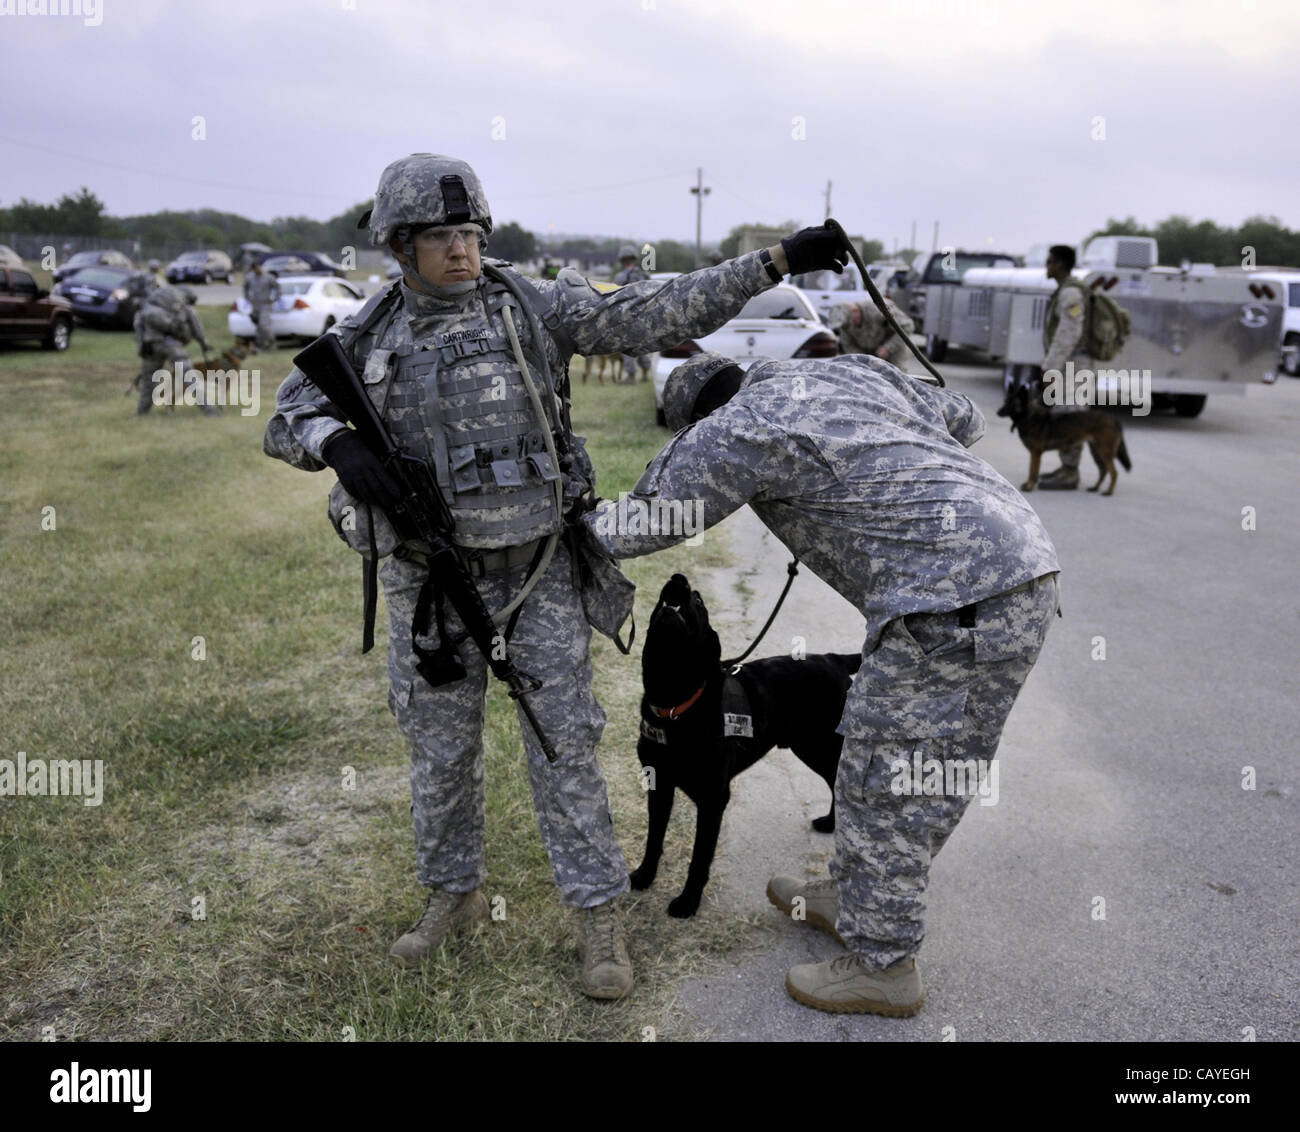 May 5, 2012 - DoD K9 Trials-May 4, 2012-Lackland Air Force Base-San Antonio, Texas---K9 Sgt David Cartwright has his gear adjusted before starting the grueling 6 mile Iron Dog Competition during the Department of Defense K9 Trials at Lackland Air Force Base in San Antonio, Texas.  They'll test milit Stock Photo